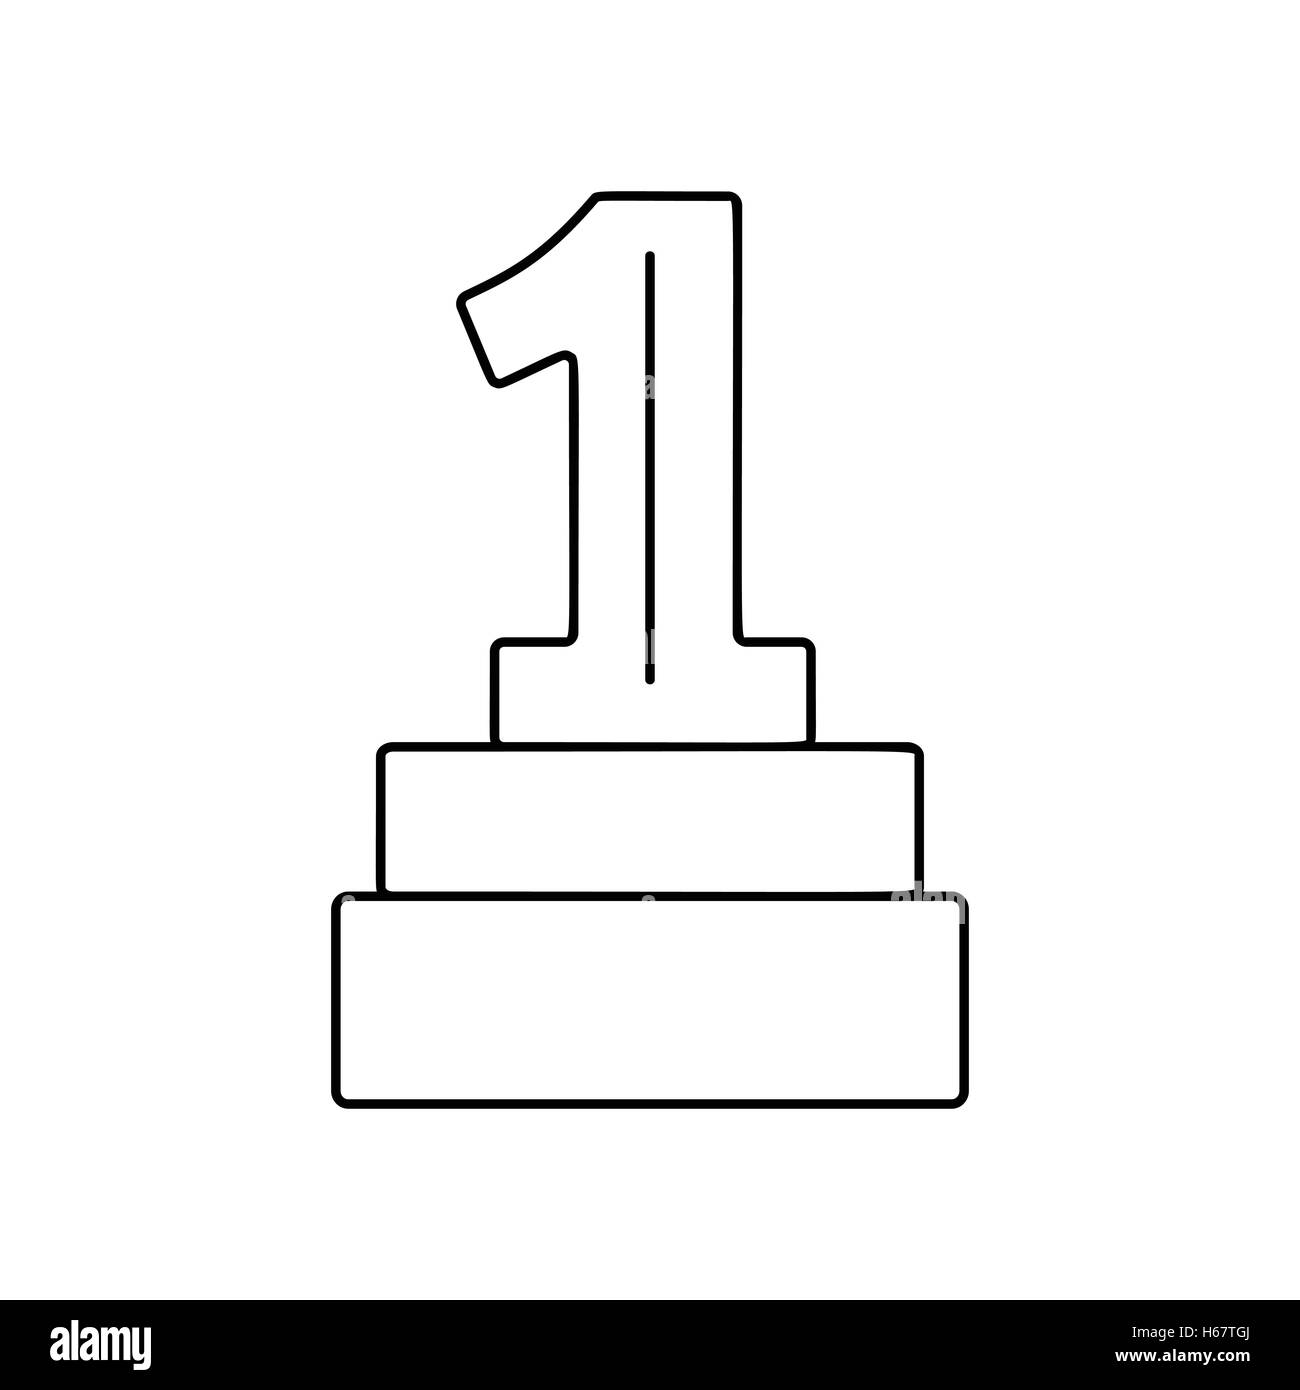 1st place award line icon Stock Vector